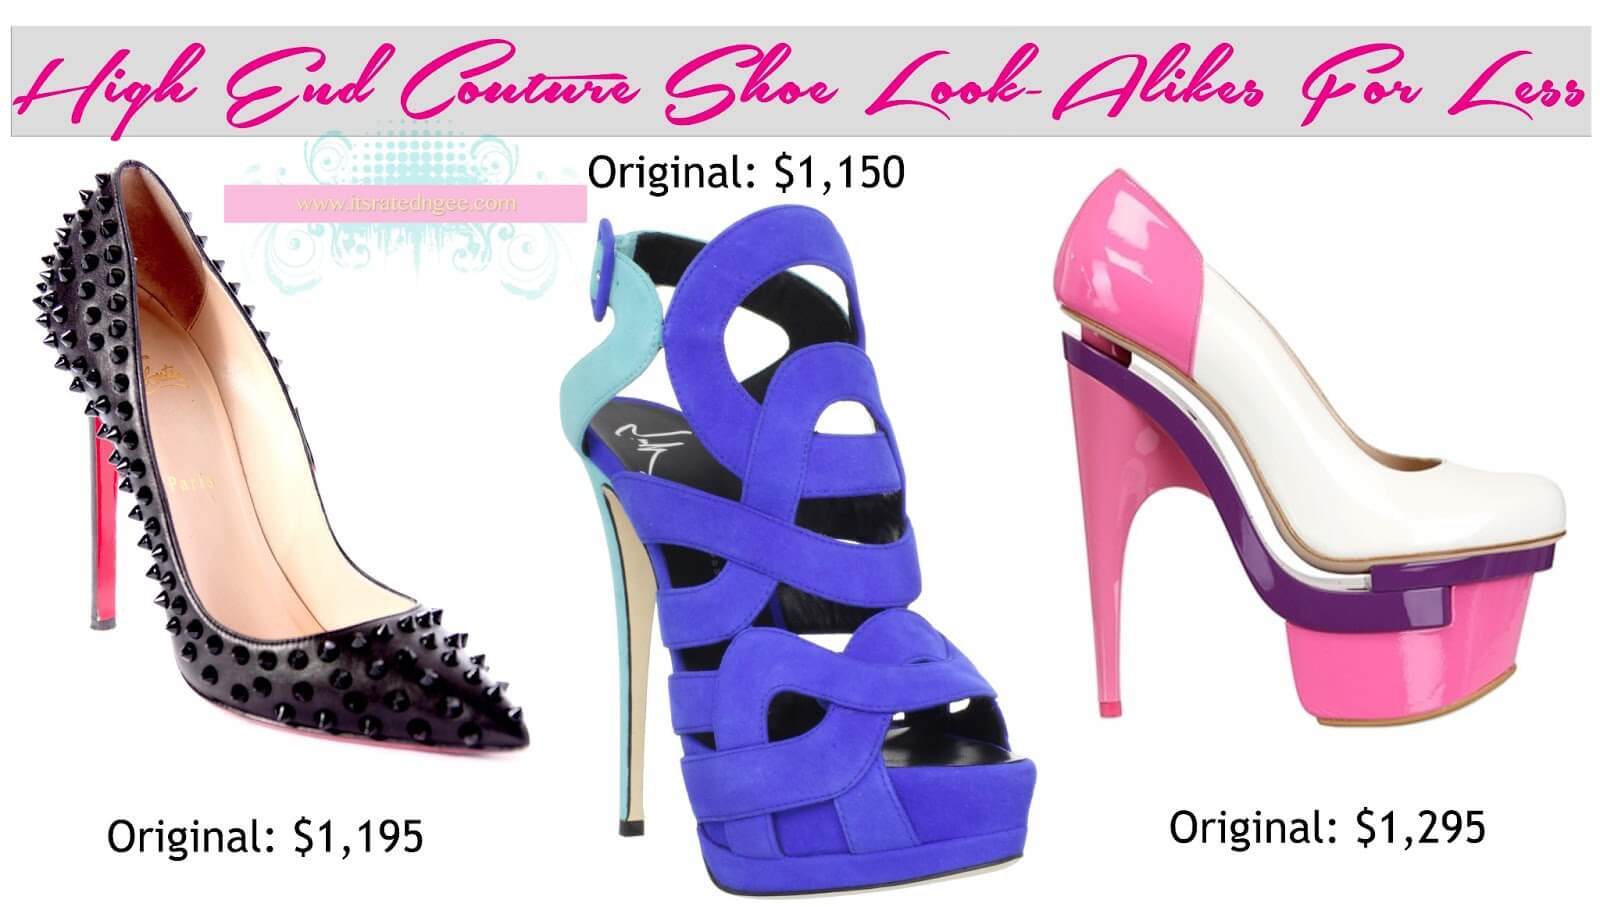 Couture Shoe Look Alikes For Less